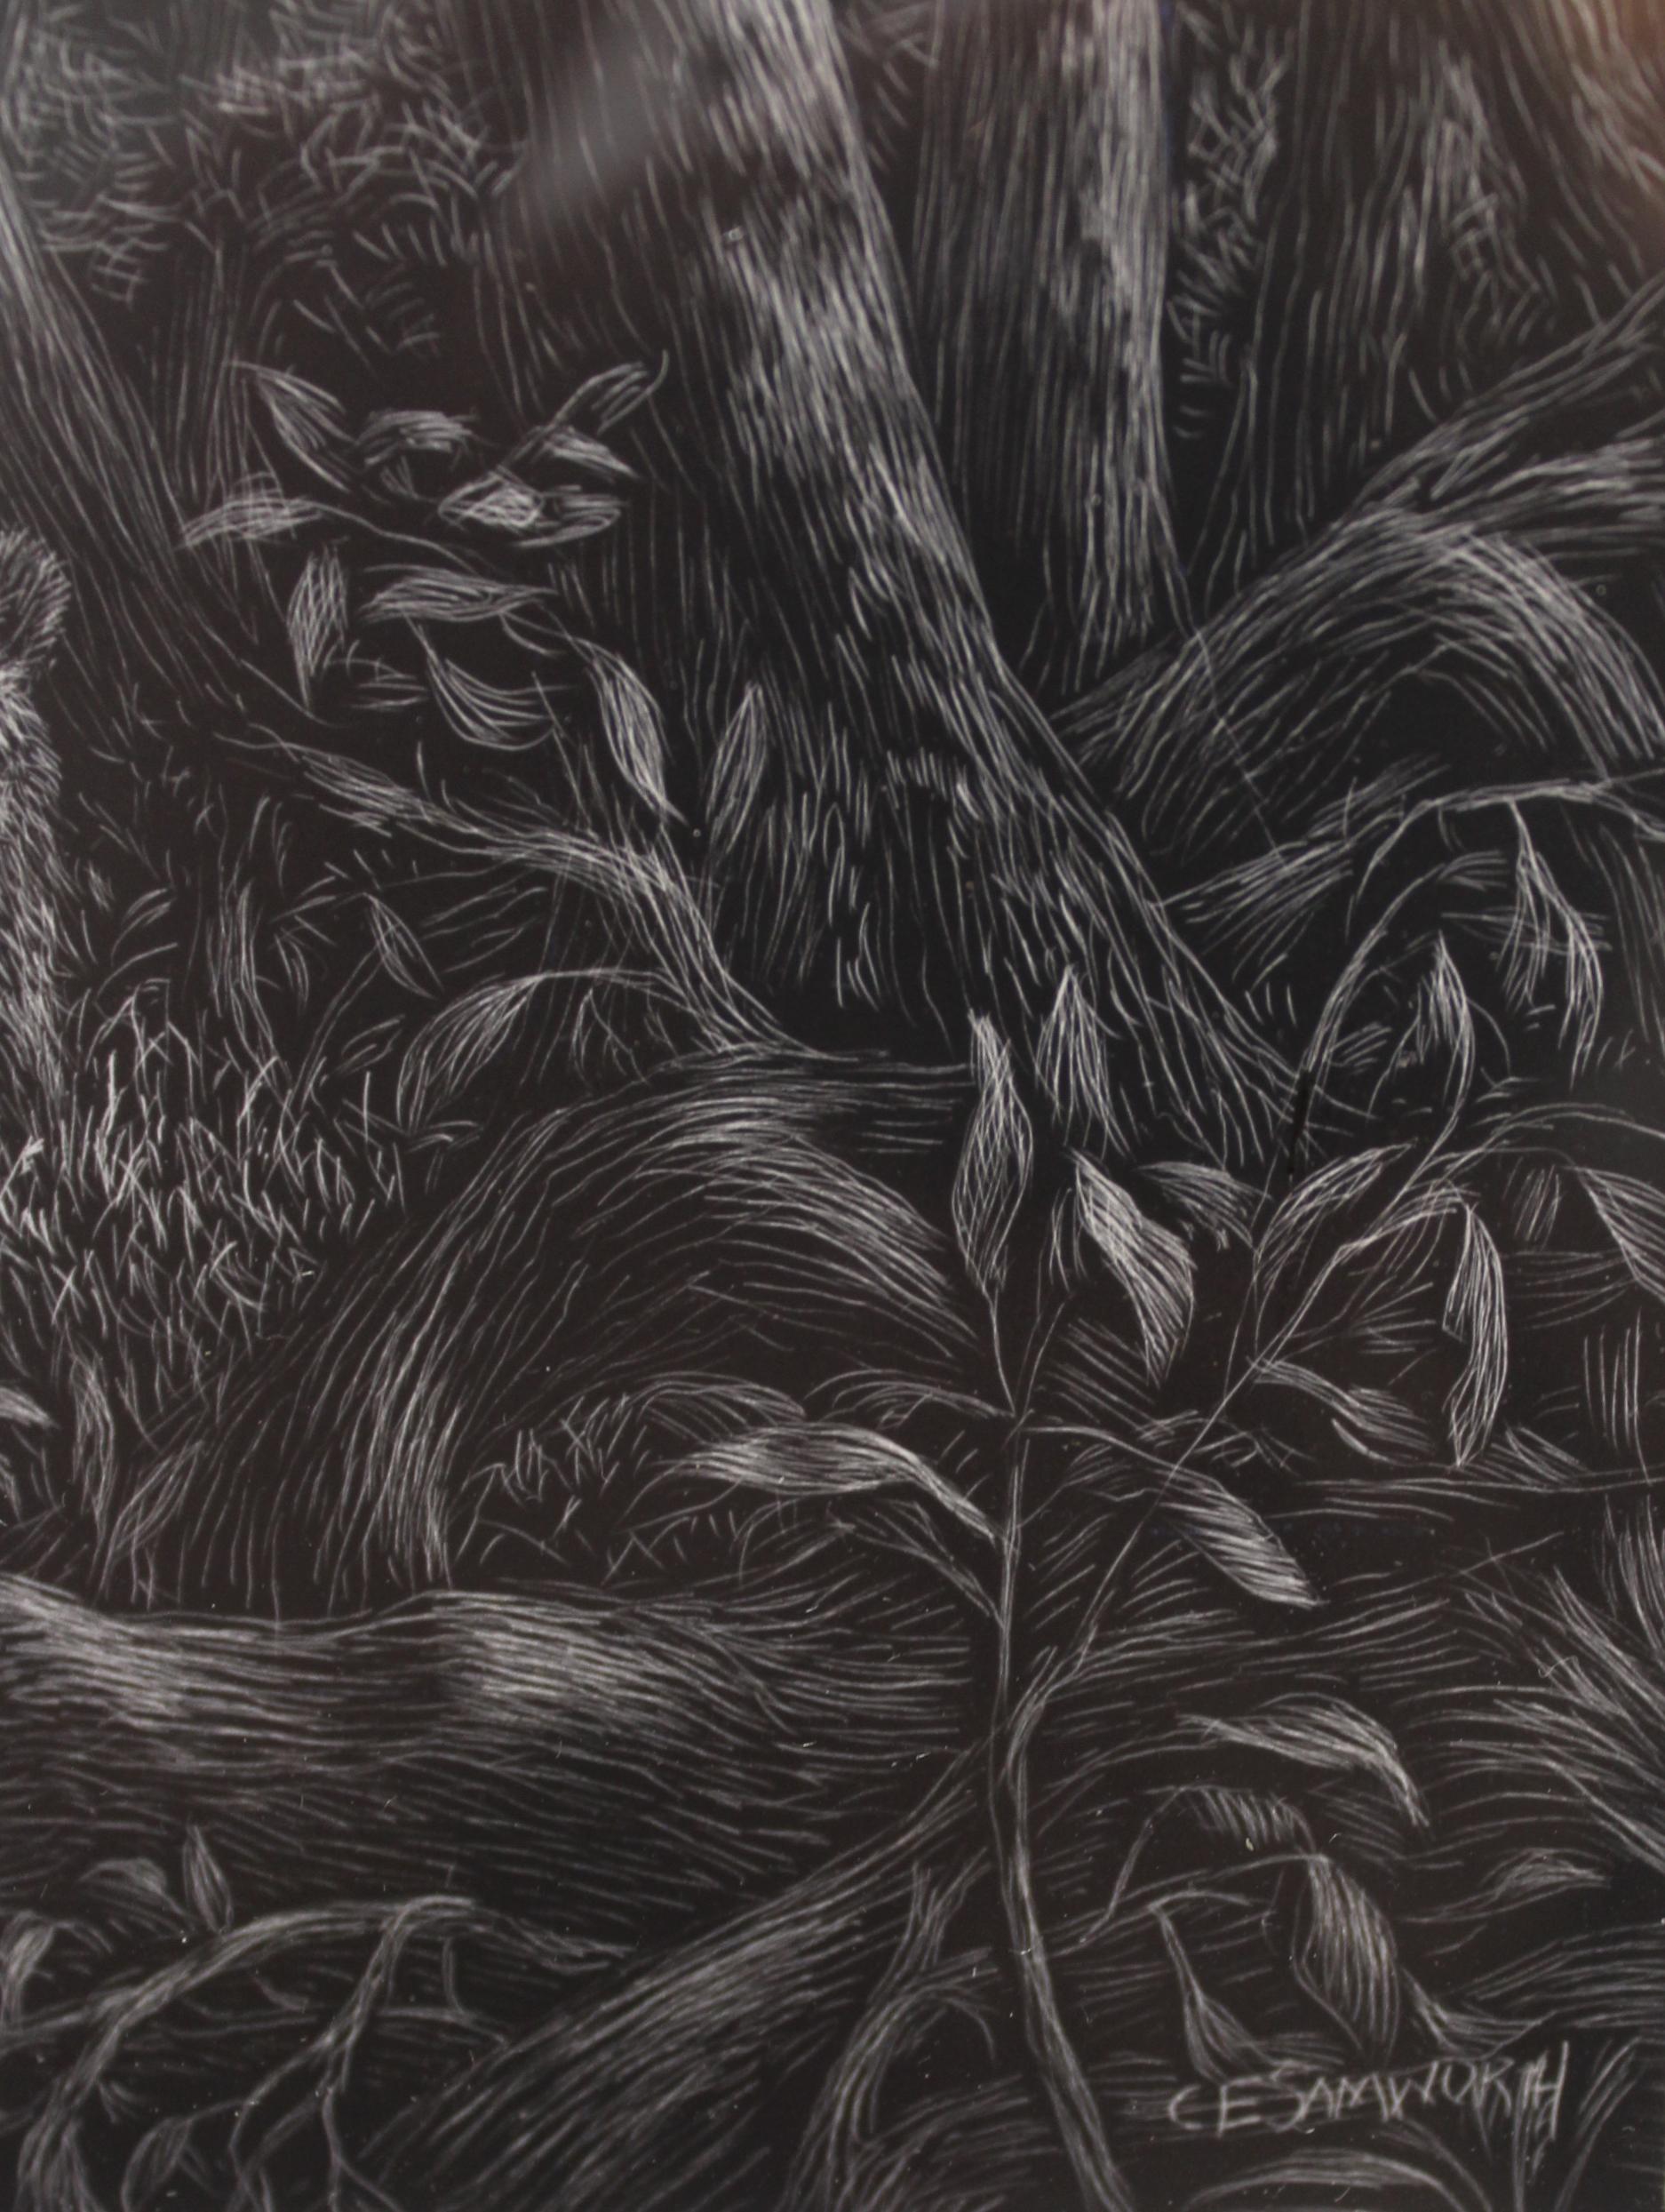 Kate Samworth is a Maryland-based artist who works with scratchboard, an illustrative technique using sharp knives and tools for engraving into a thin layer of white China clay that is coated with dark, often black India ink. Her series 